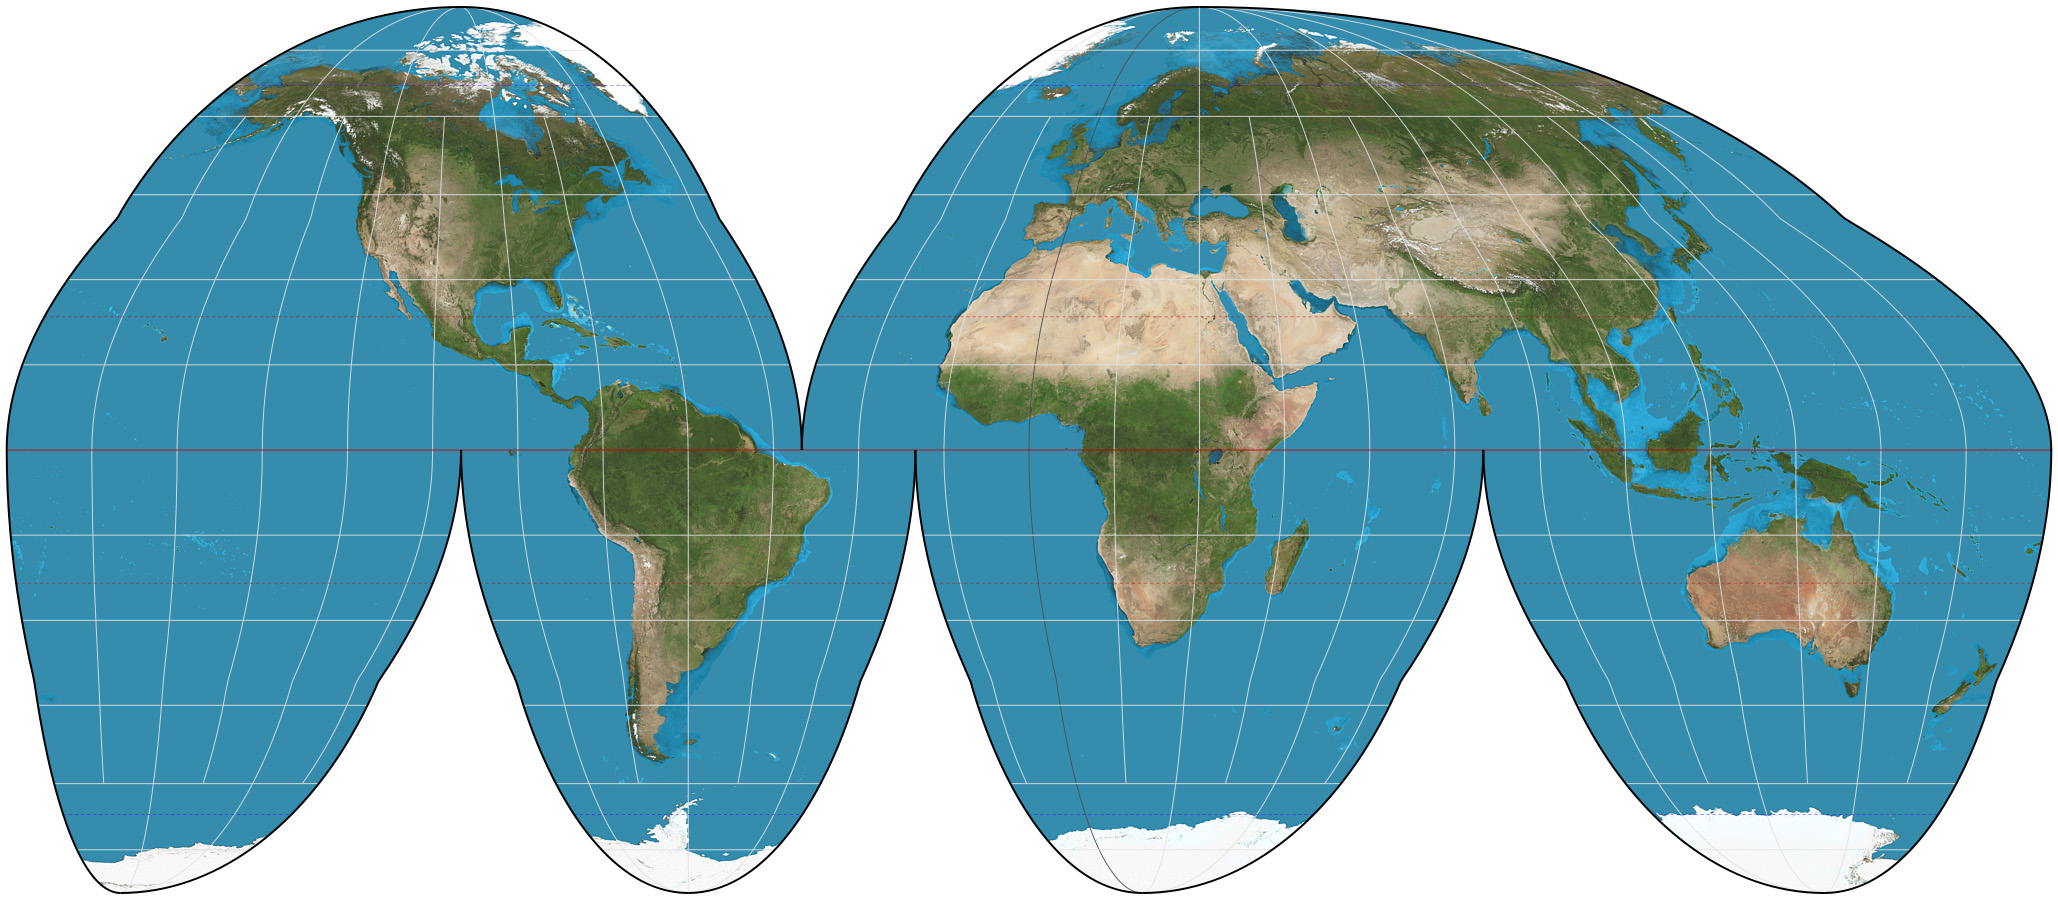 What is more accurate than Mercator projection?